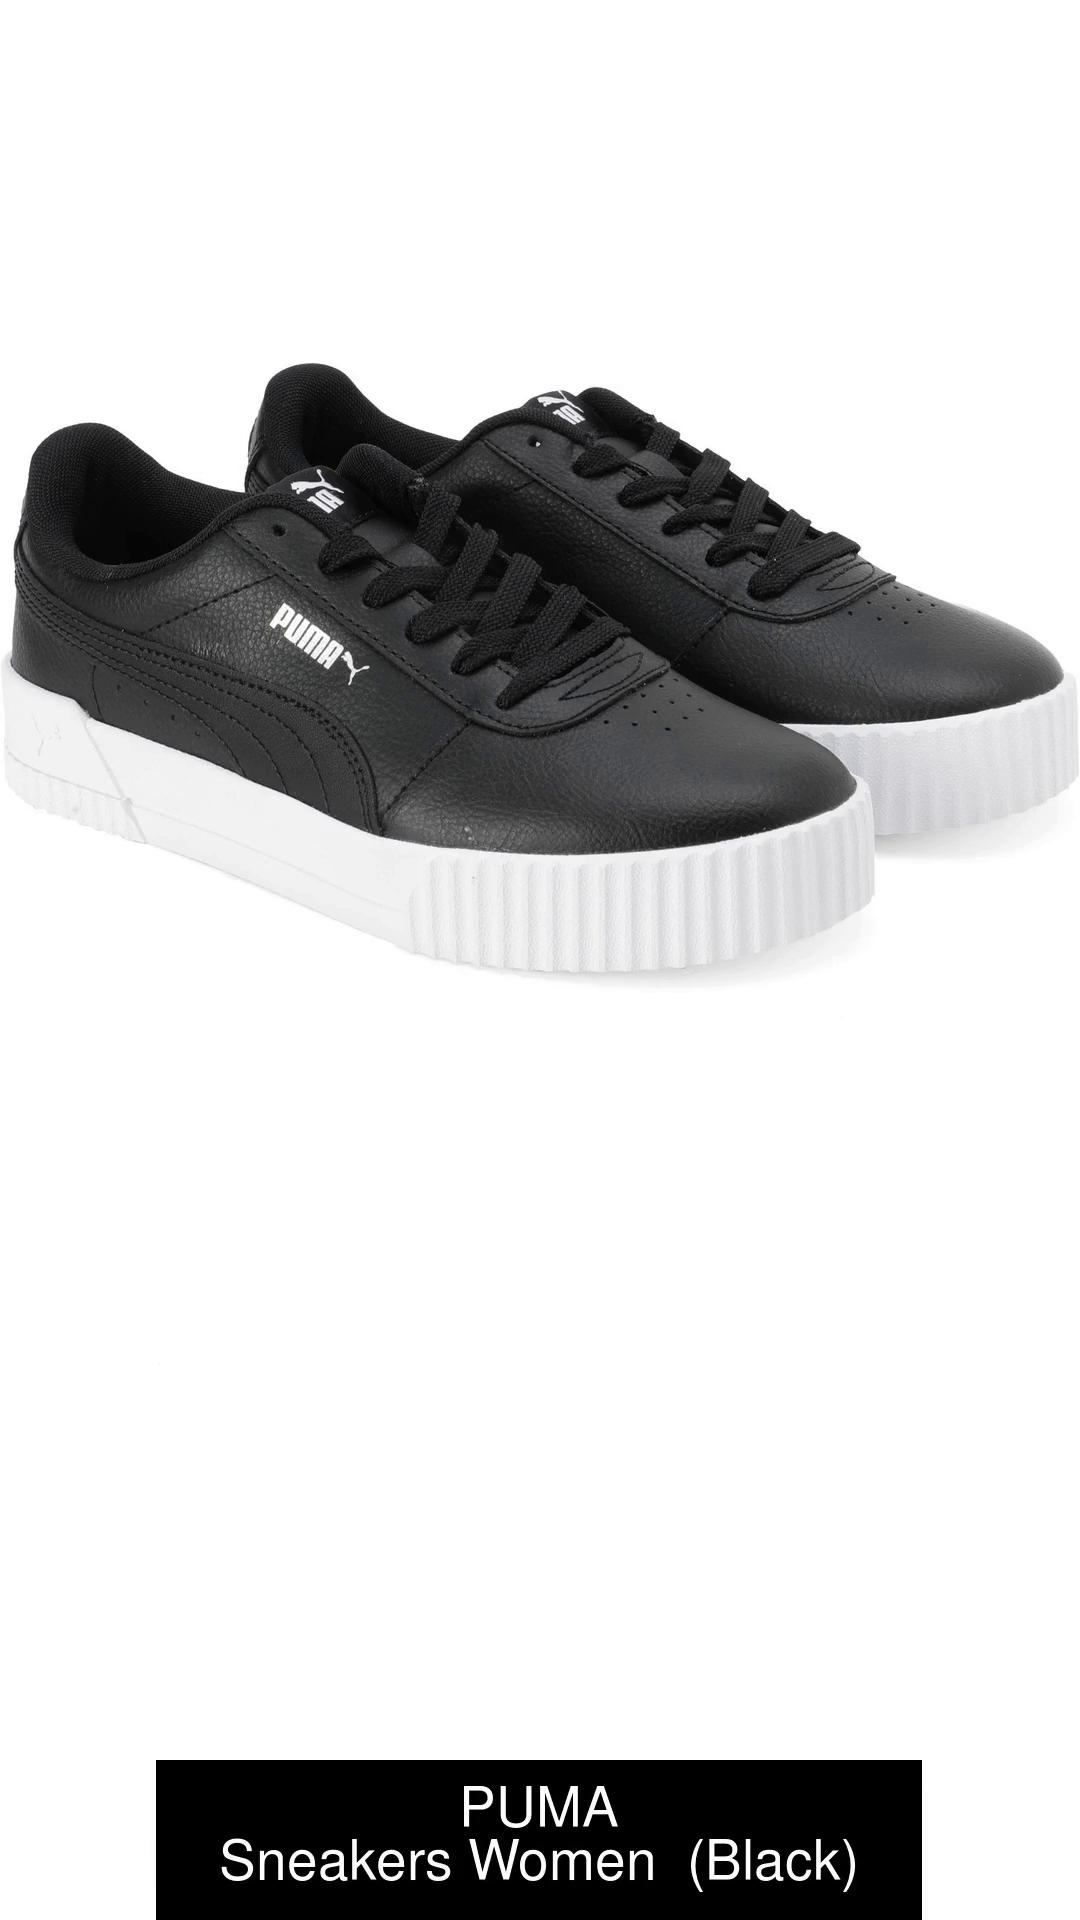 PUMA Carina L Sneakers For Women - Buy PUMA Carina L Sneakers For Women  Online at Best Price - Shop Online for Footwears in India